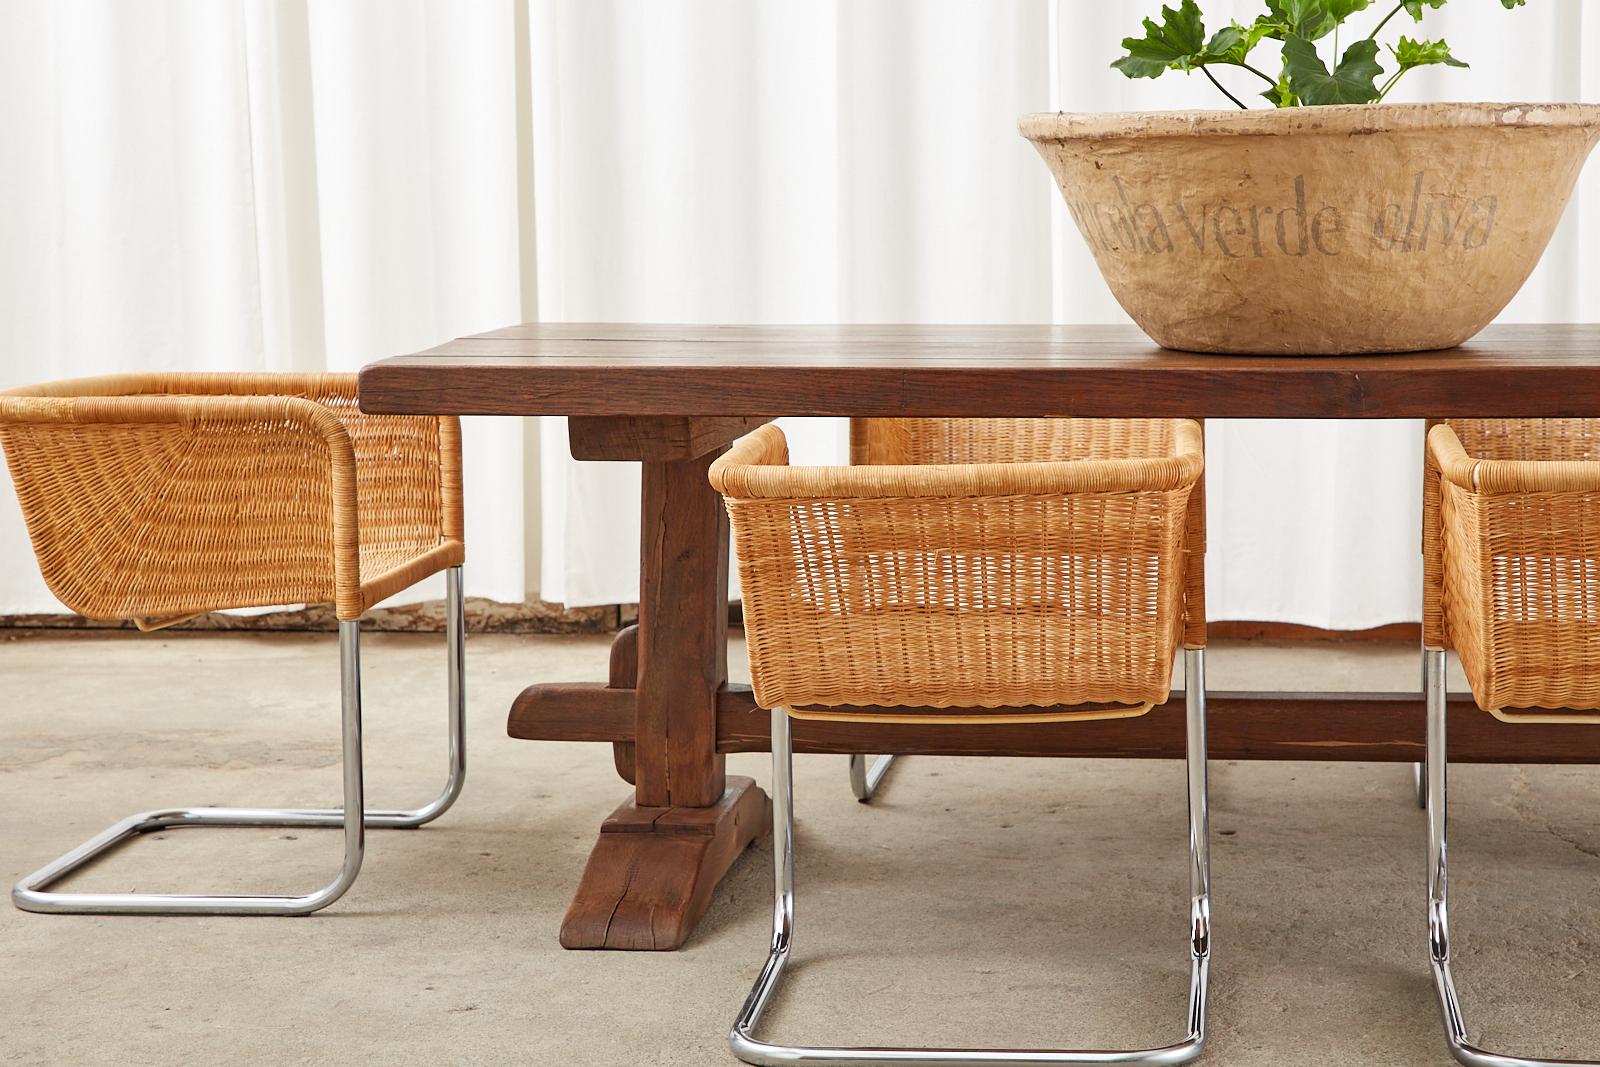 Fantastic Mid-Century Modern set of twelve wicker basket chairs by Harvey Probber. Model D43 cantilever chairs constructed from a chromed steel tube frame with a woven rattan wicker basket style seat. The wicker has a beautifully woven rattan fan